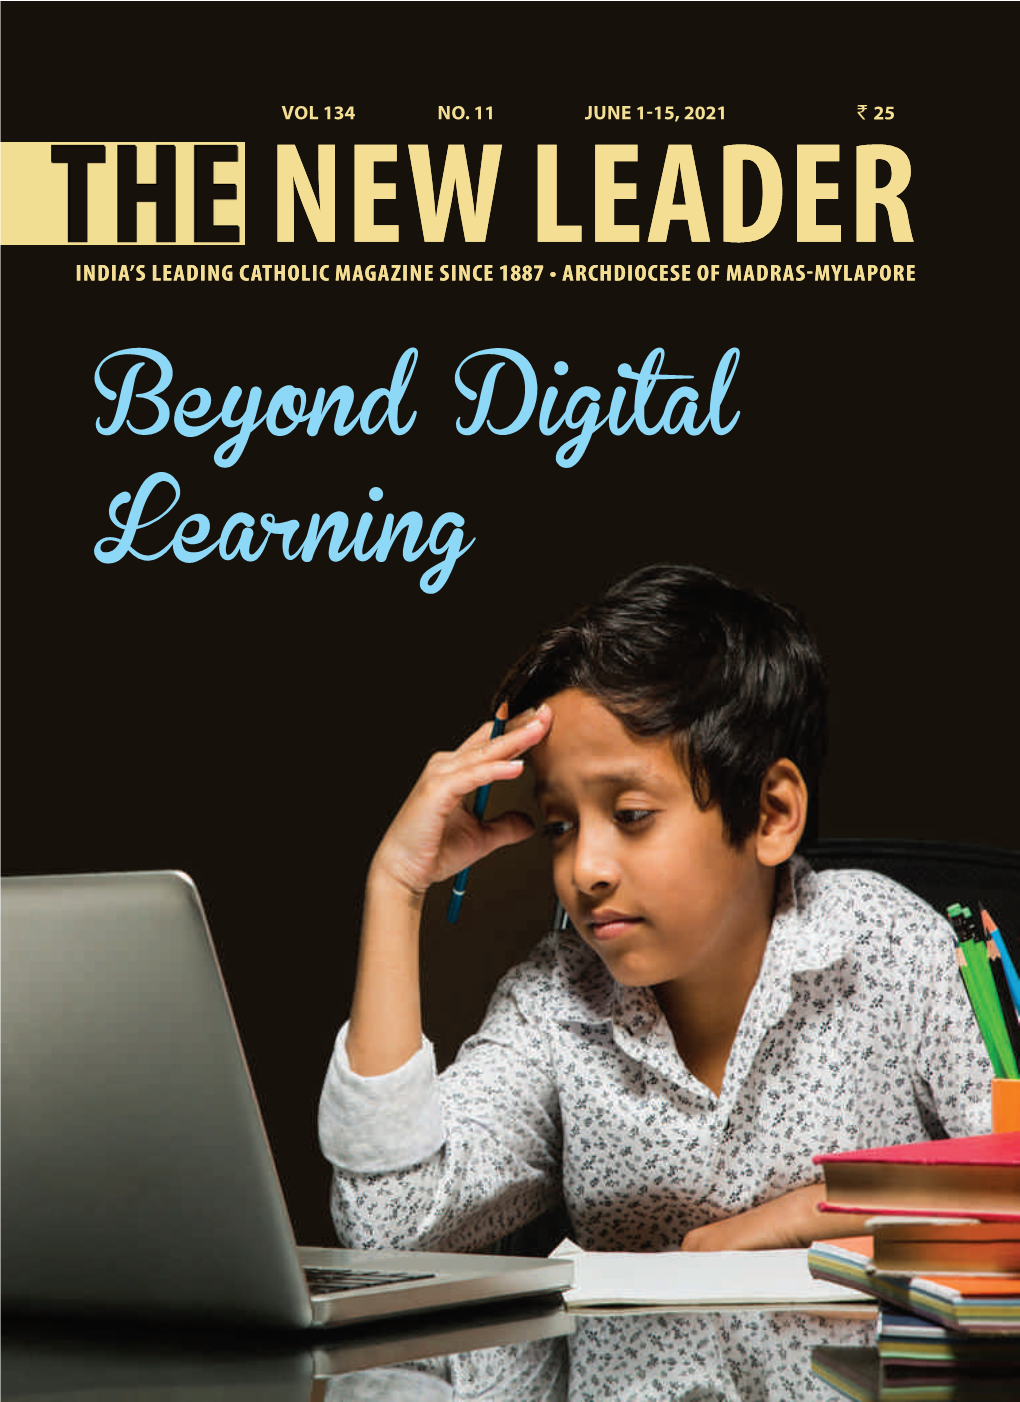 Beyond Digital Learning,” to Struggle in Order to Keep Going